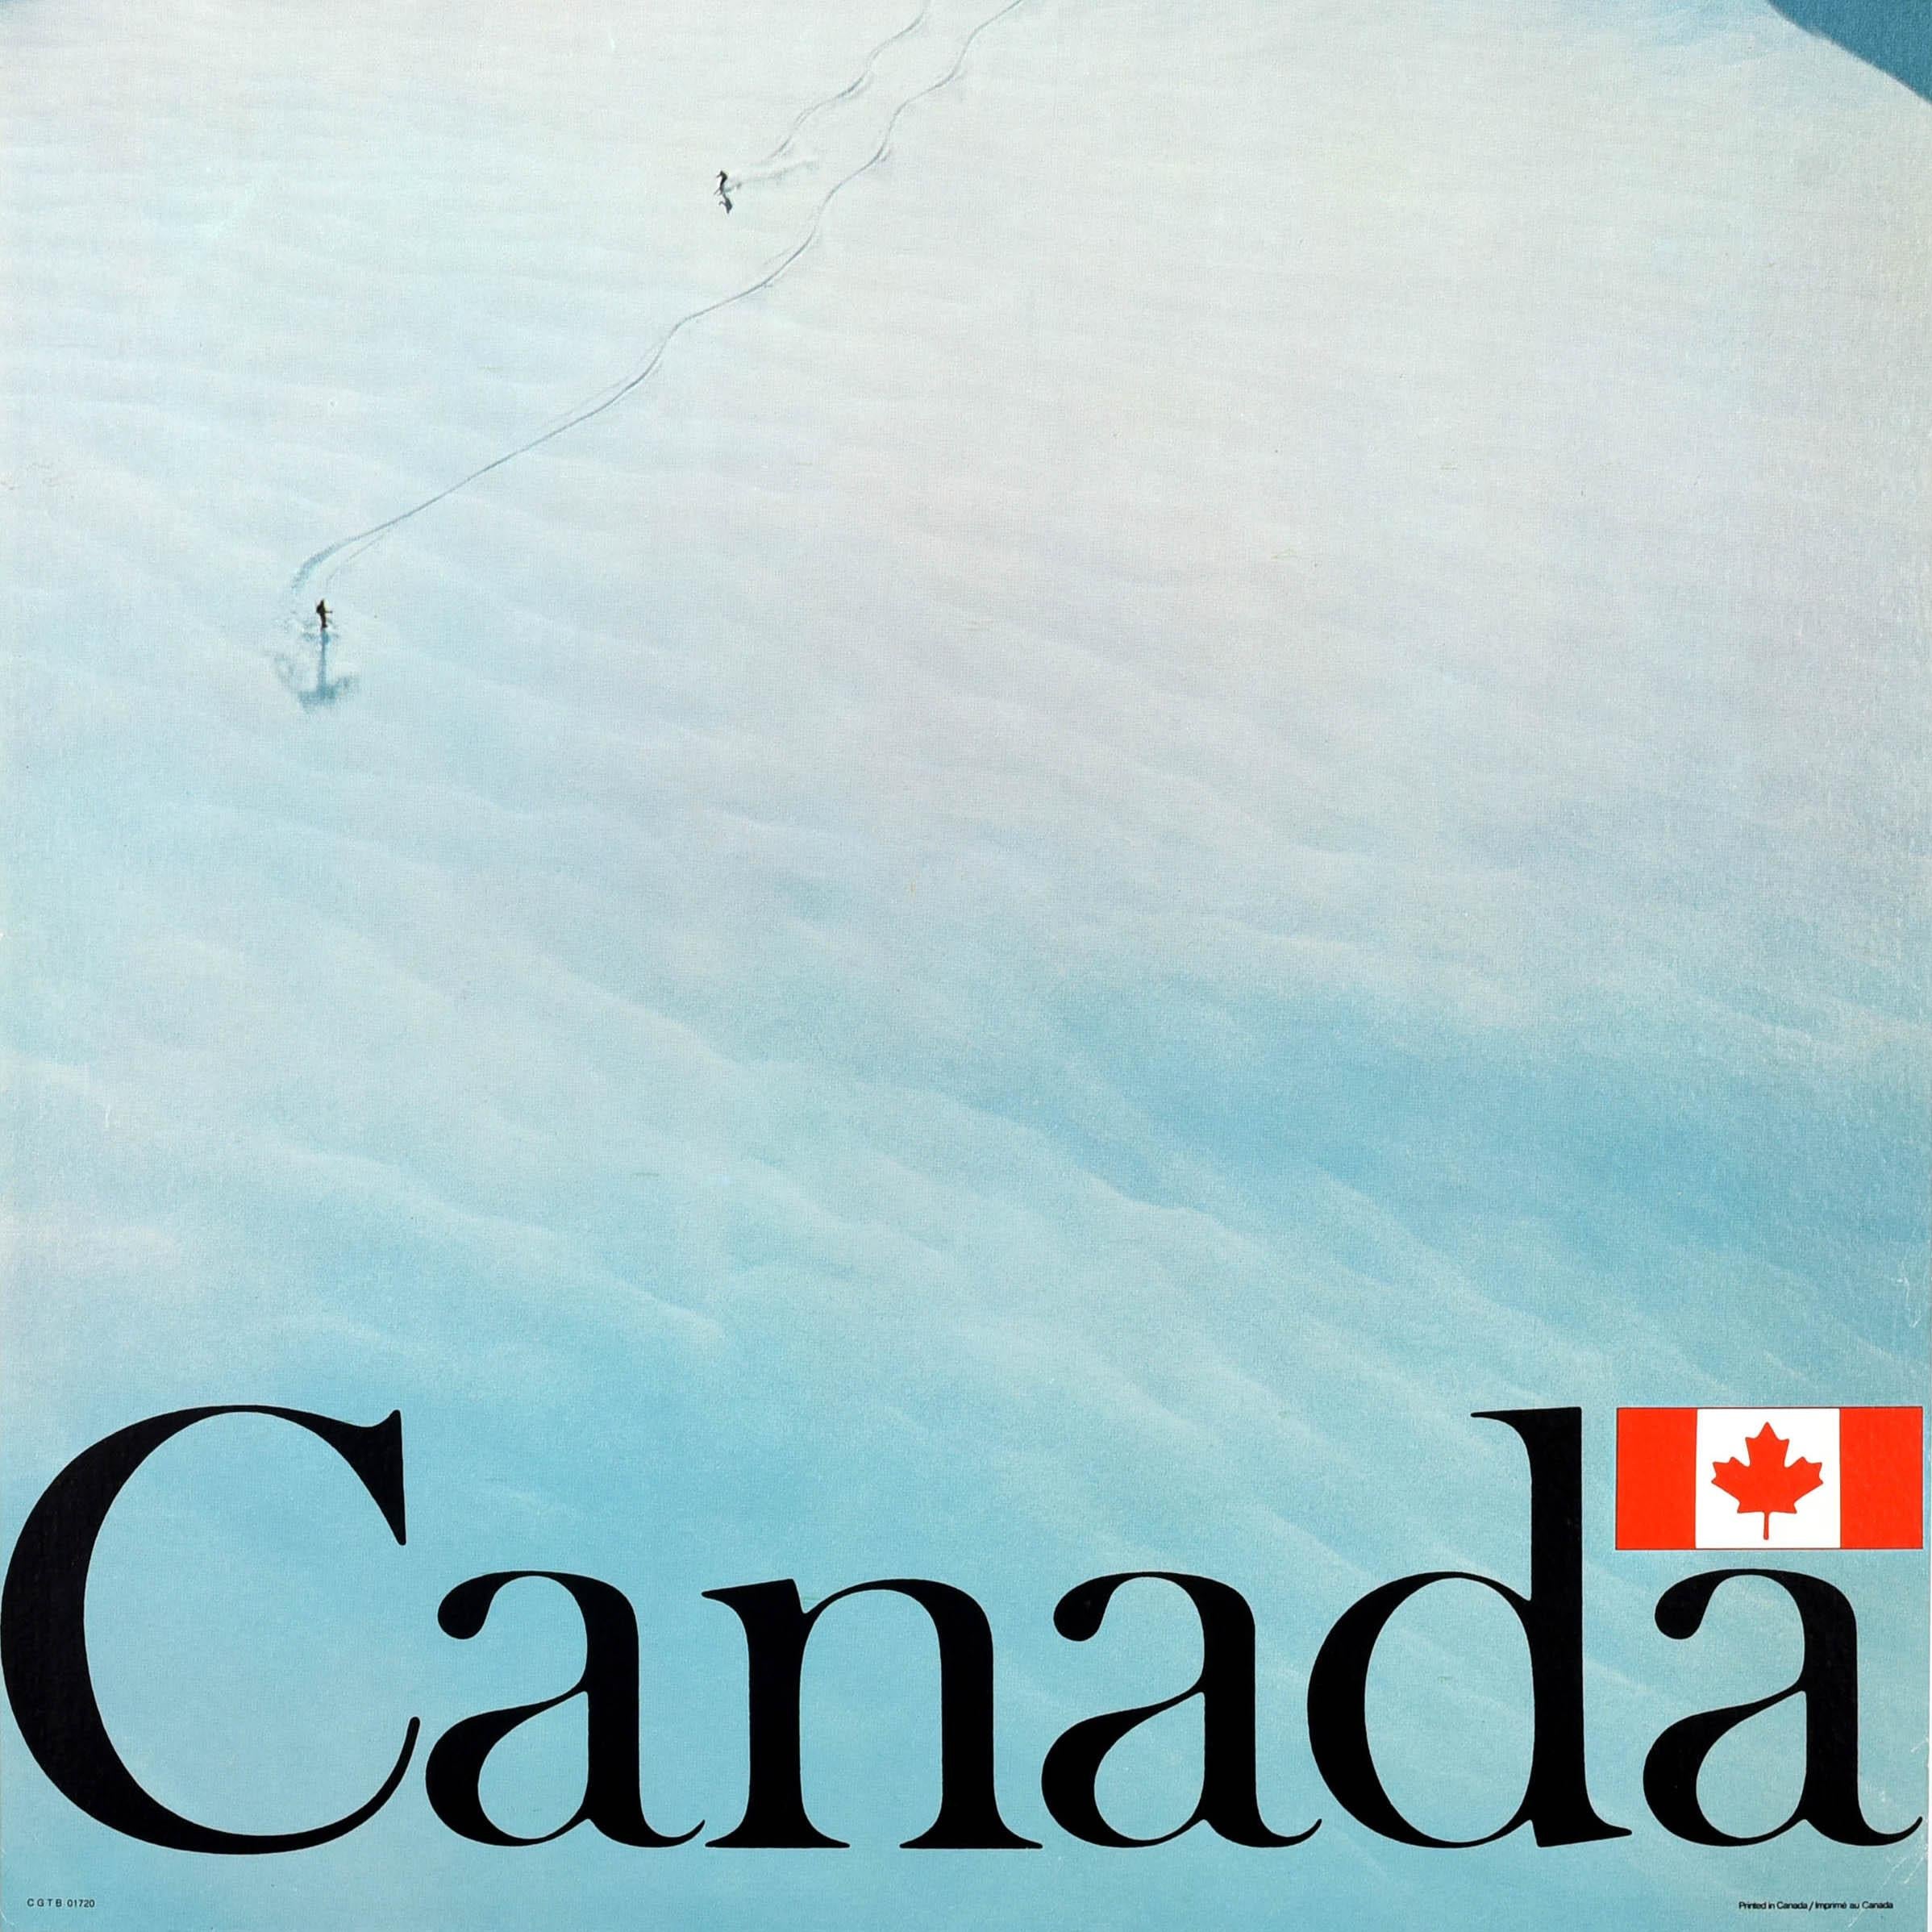 Original vintage ski travel poster for Canada featuring skiers skiing down a mountain slope leaving trails in the snow behind them, the bold black lettering with the maple leaf Canadian flag above the last a below. Very good condition, minor